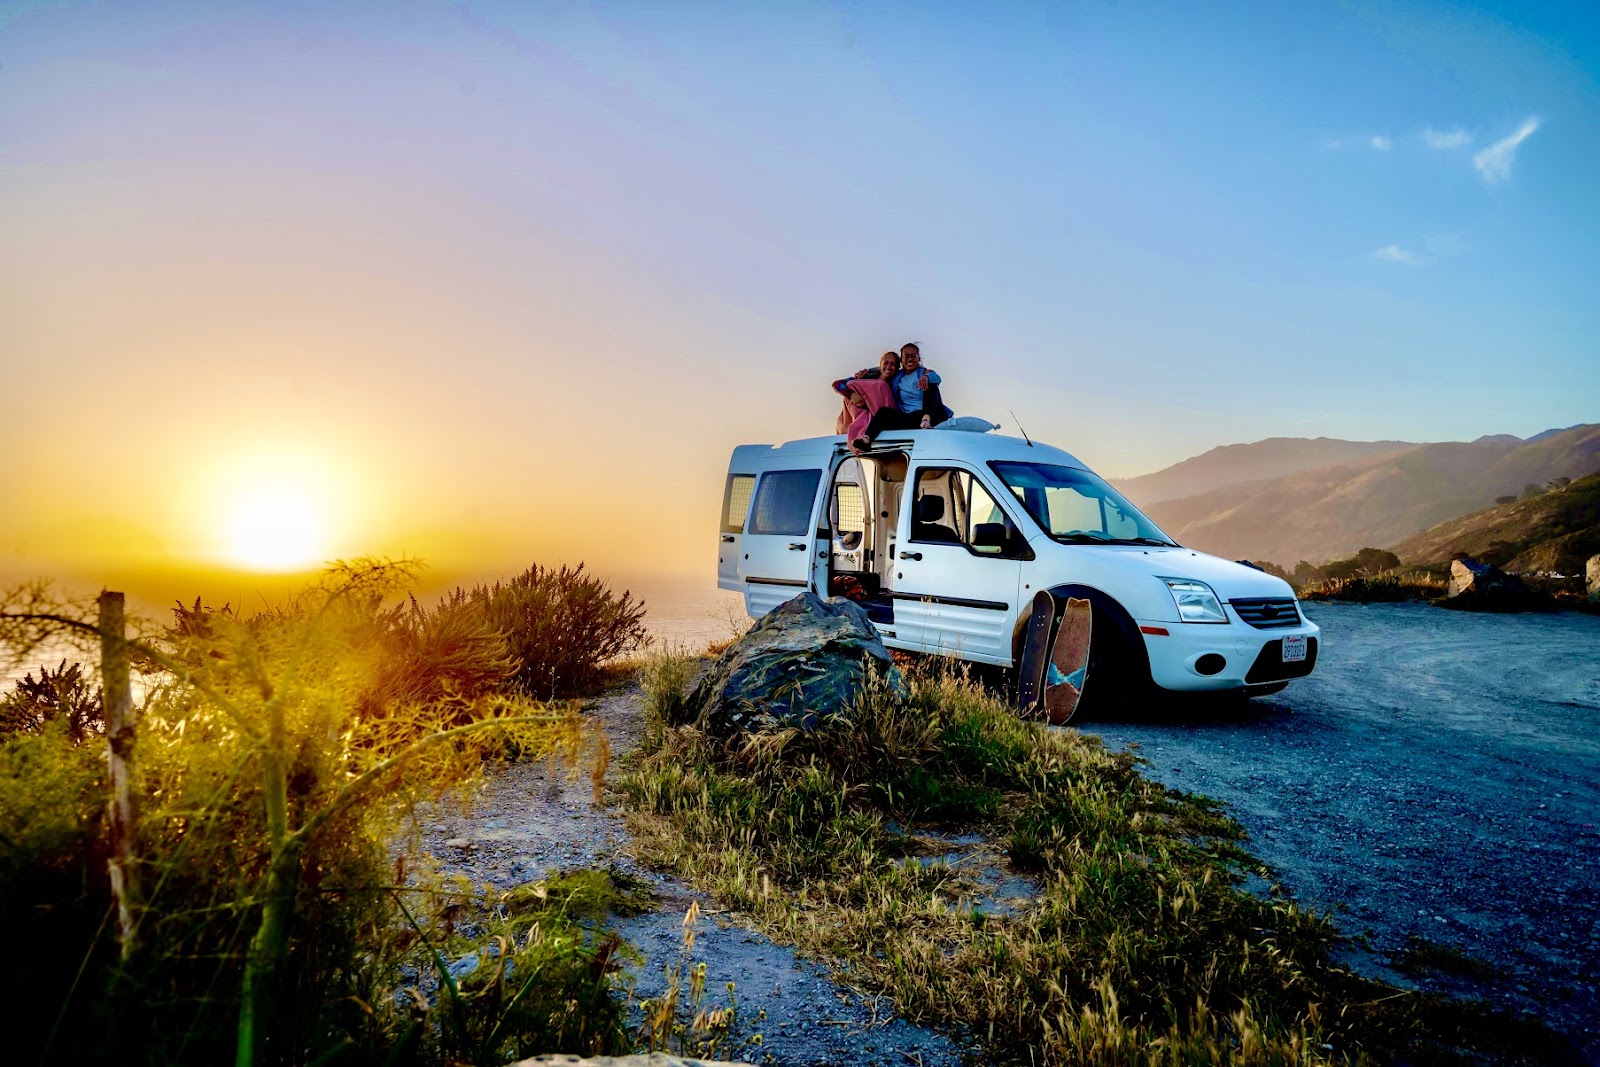 Huemer and Zhong sit atop the van against a scenic landscape and setting sun